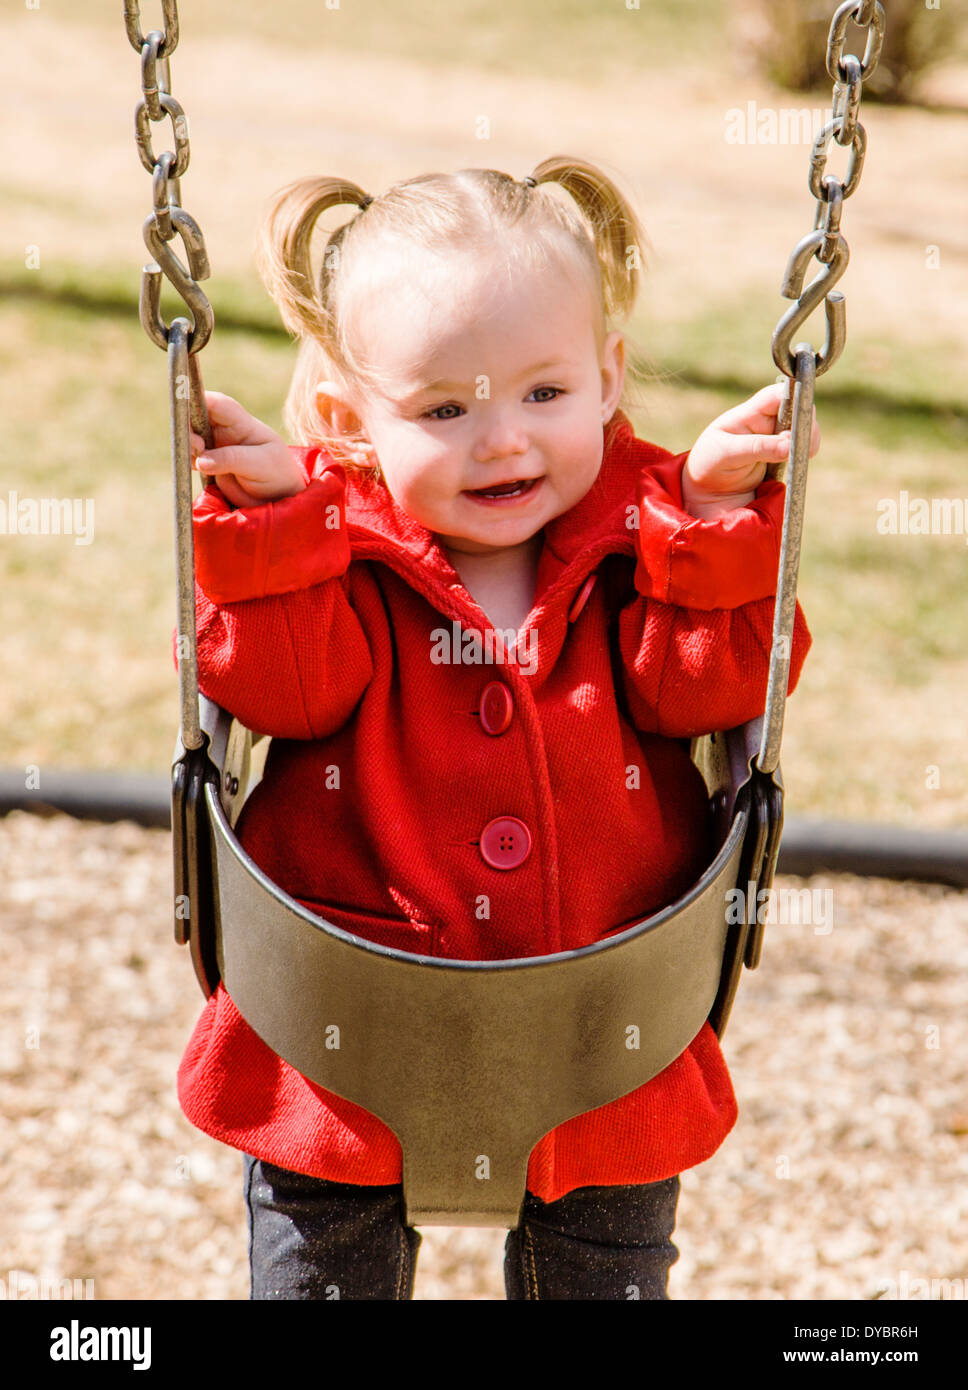 Cute, adorable 16 month little girl swinging on a park playground Stock Photo